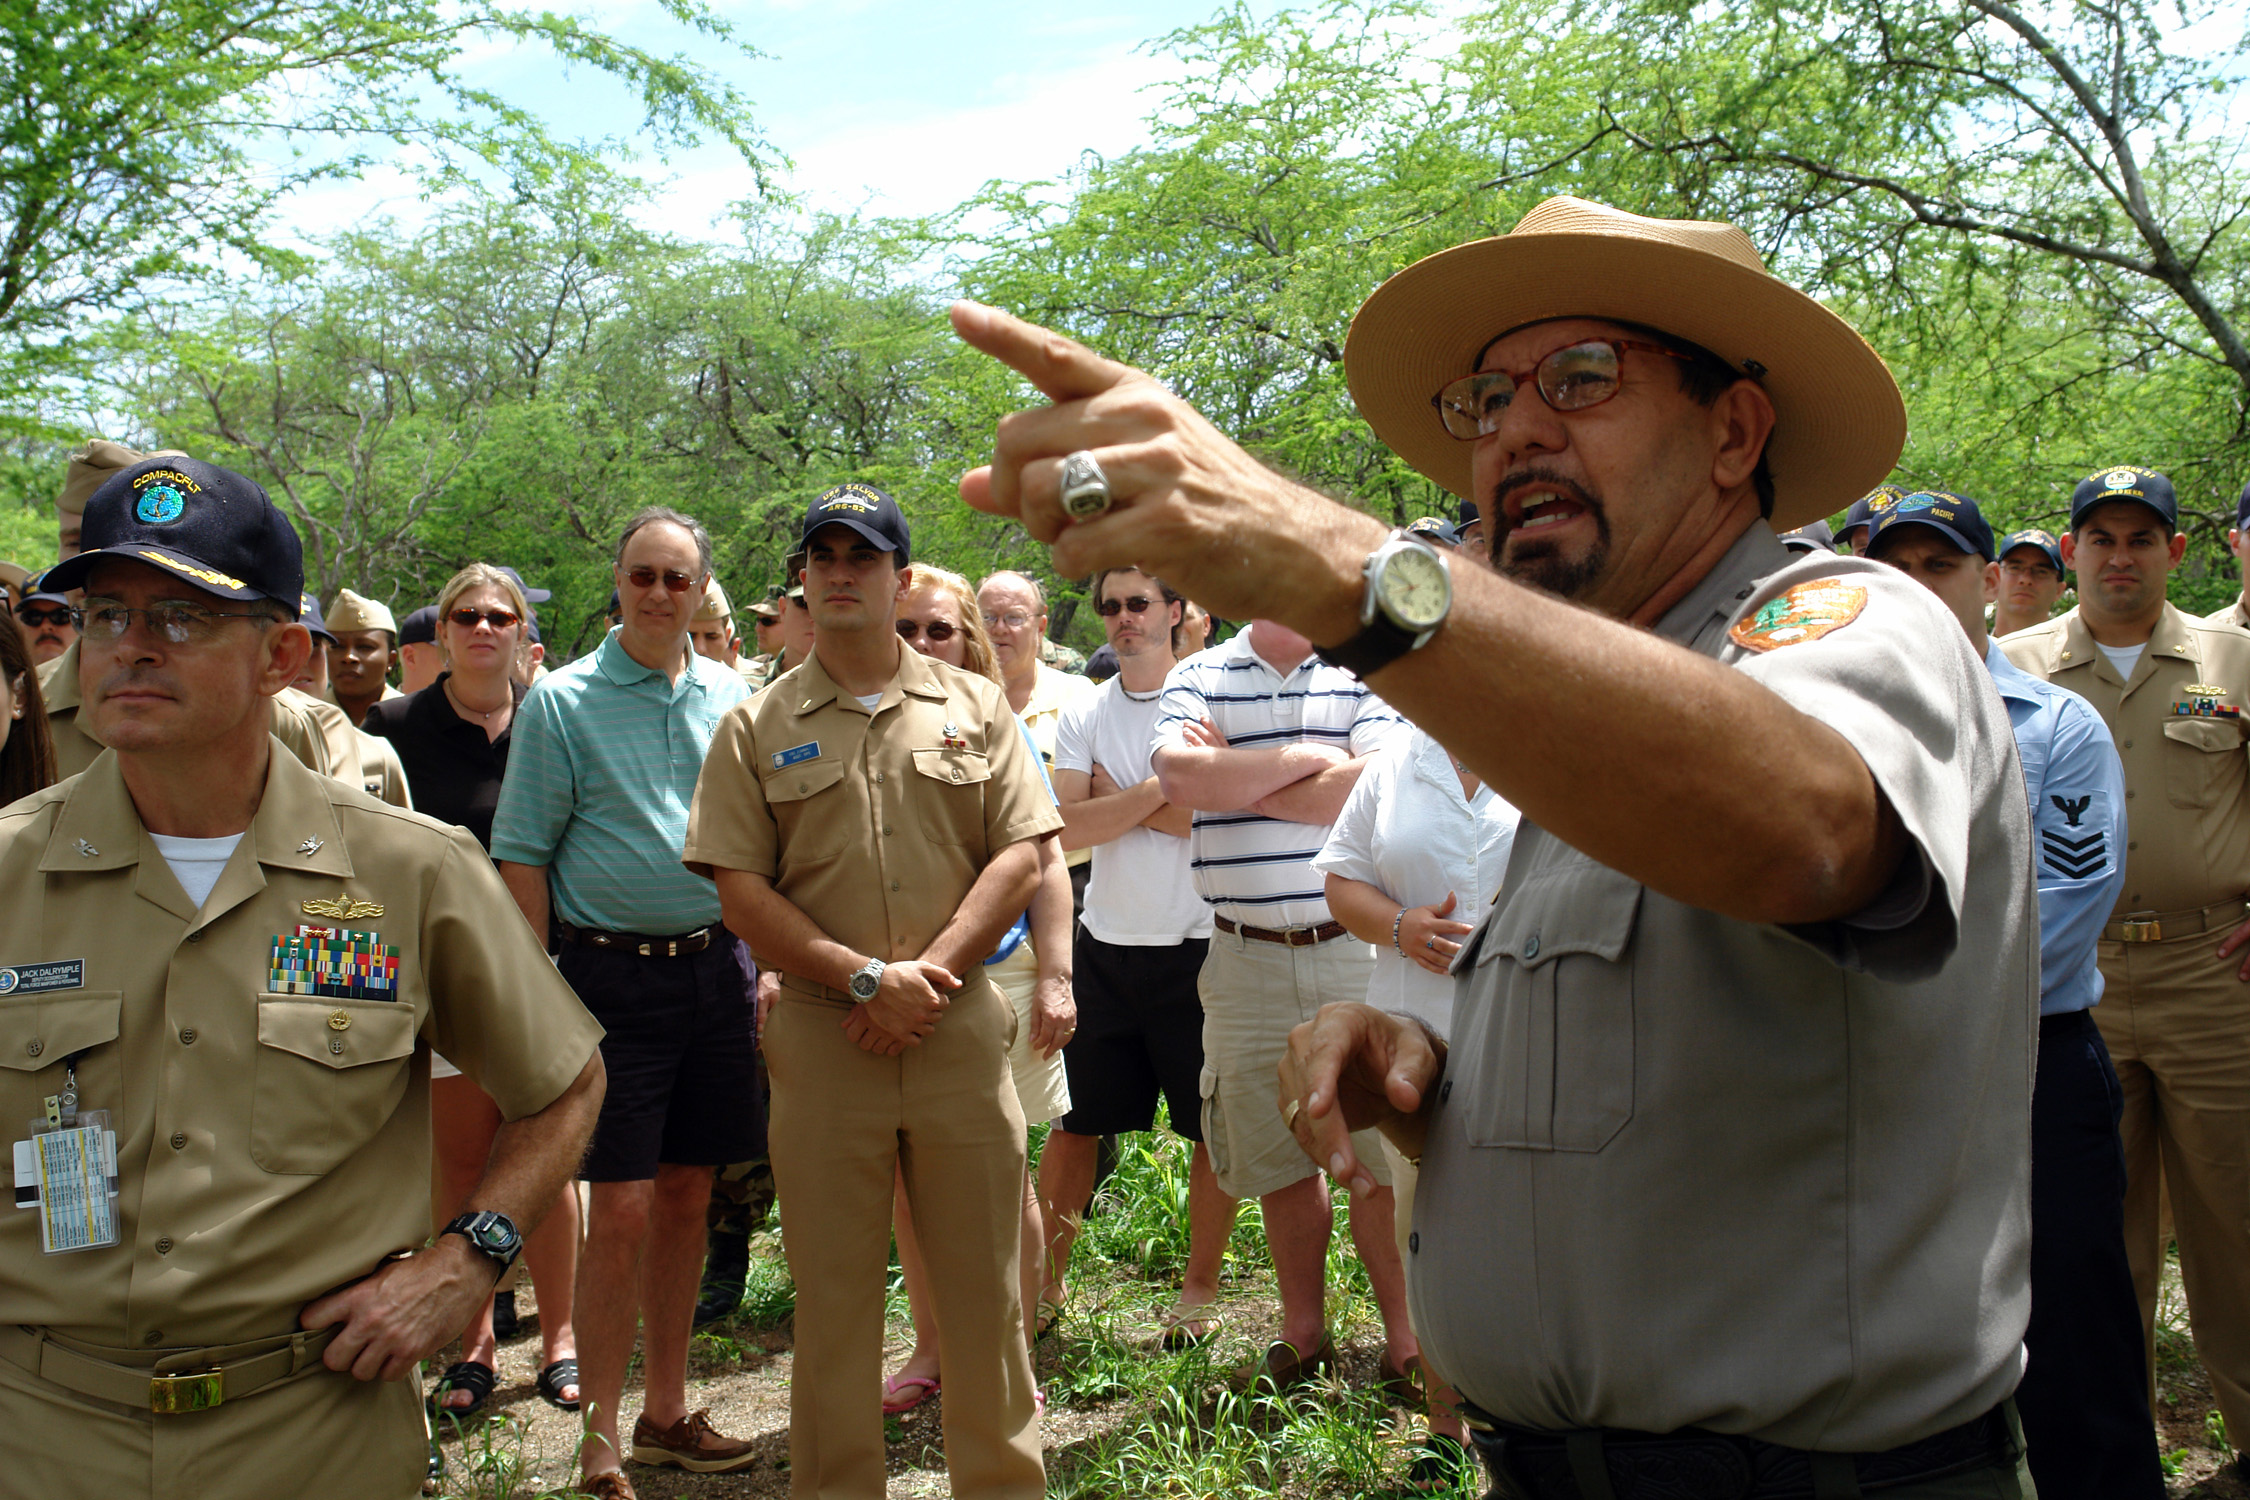 US Navy 060316-N-9643K-001 National Park Service Ranger Daniel Martinez addresses a group of Sailors from the Pearl Harbor Surface Navy Association (SNA) at the site of the USS Arizona relics